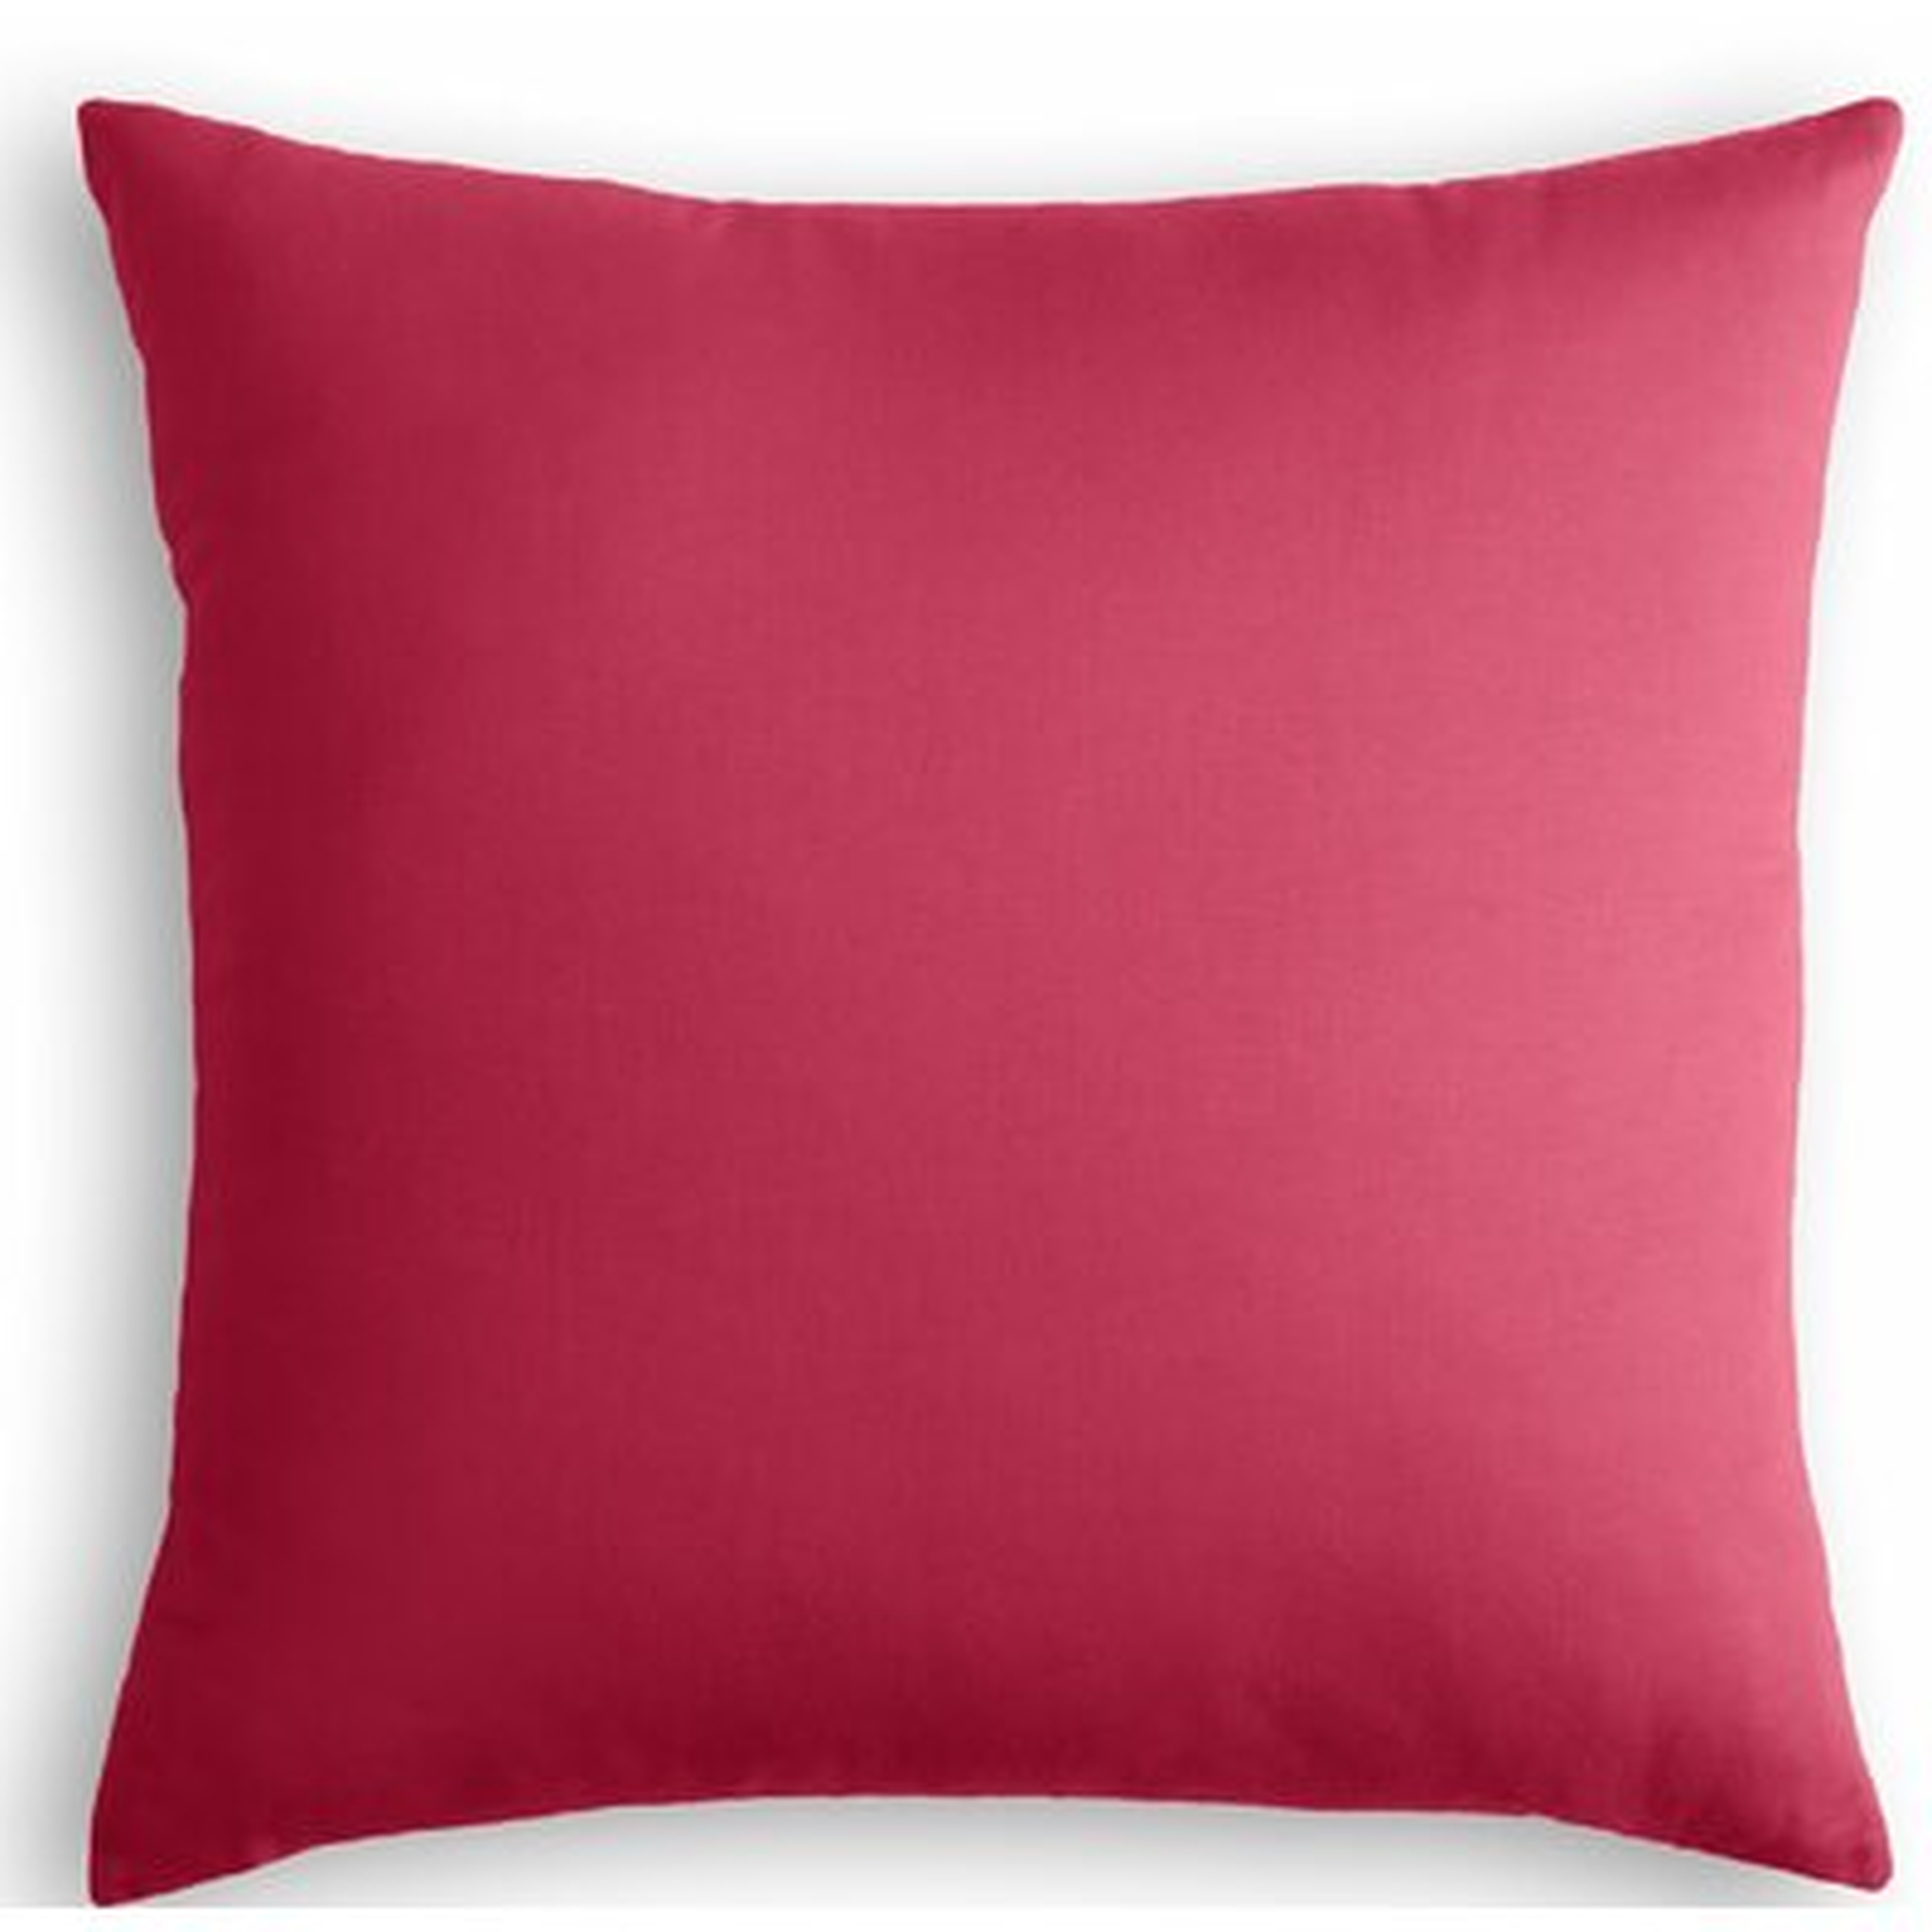 Loom Decor Square Pillow Cover & Insert, Pink, 20" x 20" - Wayfair